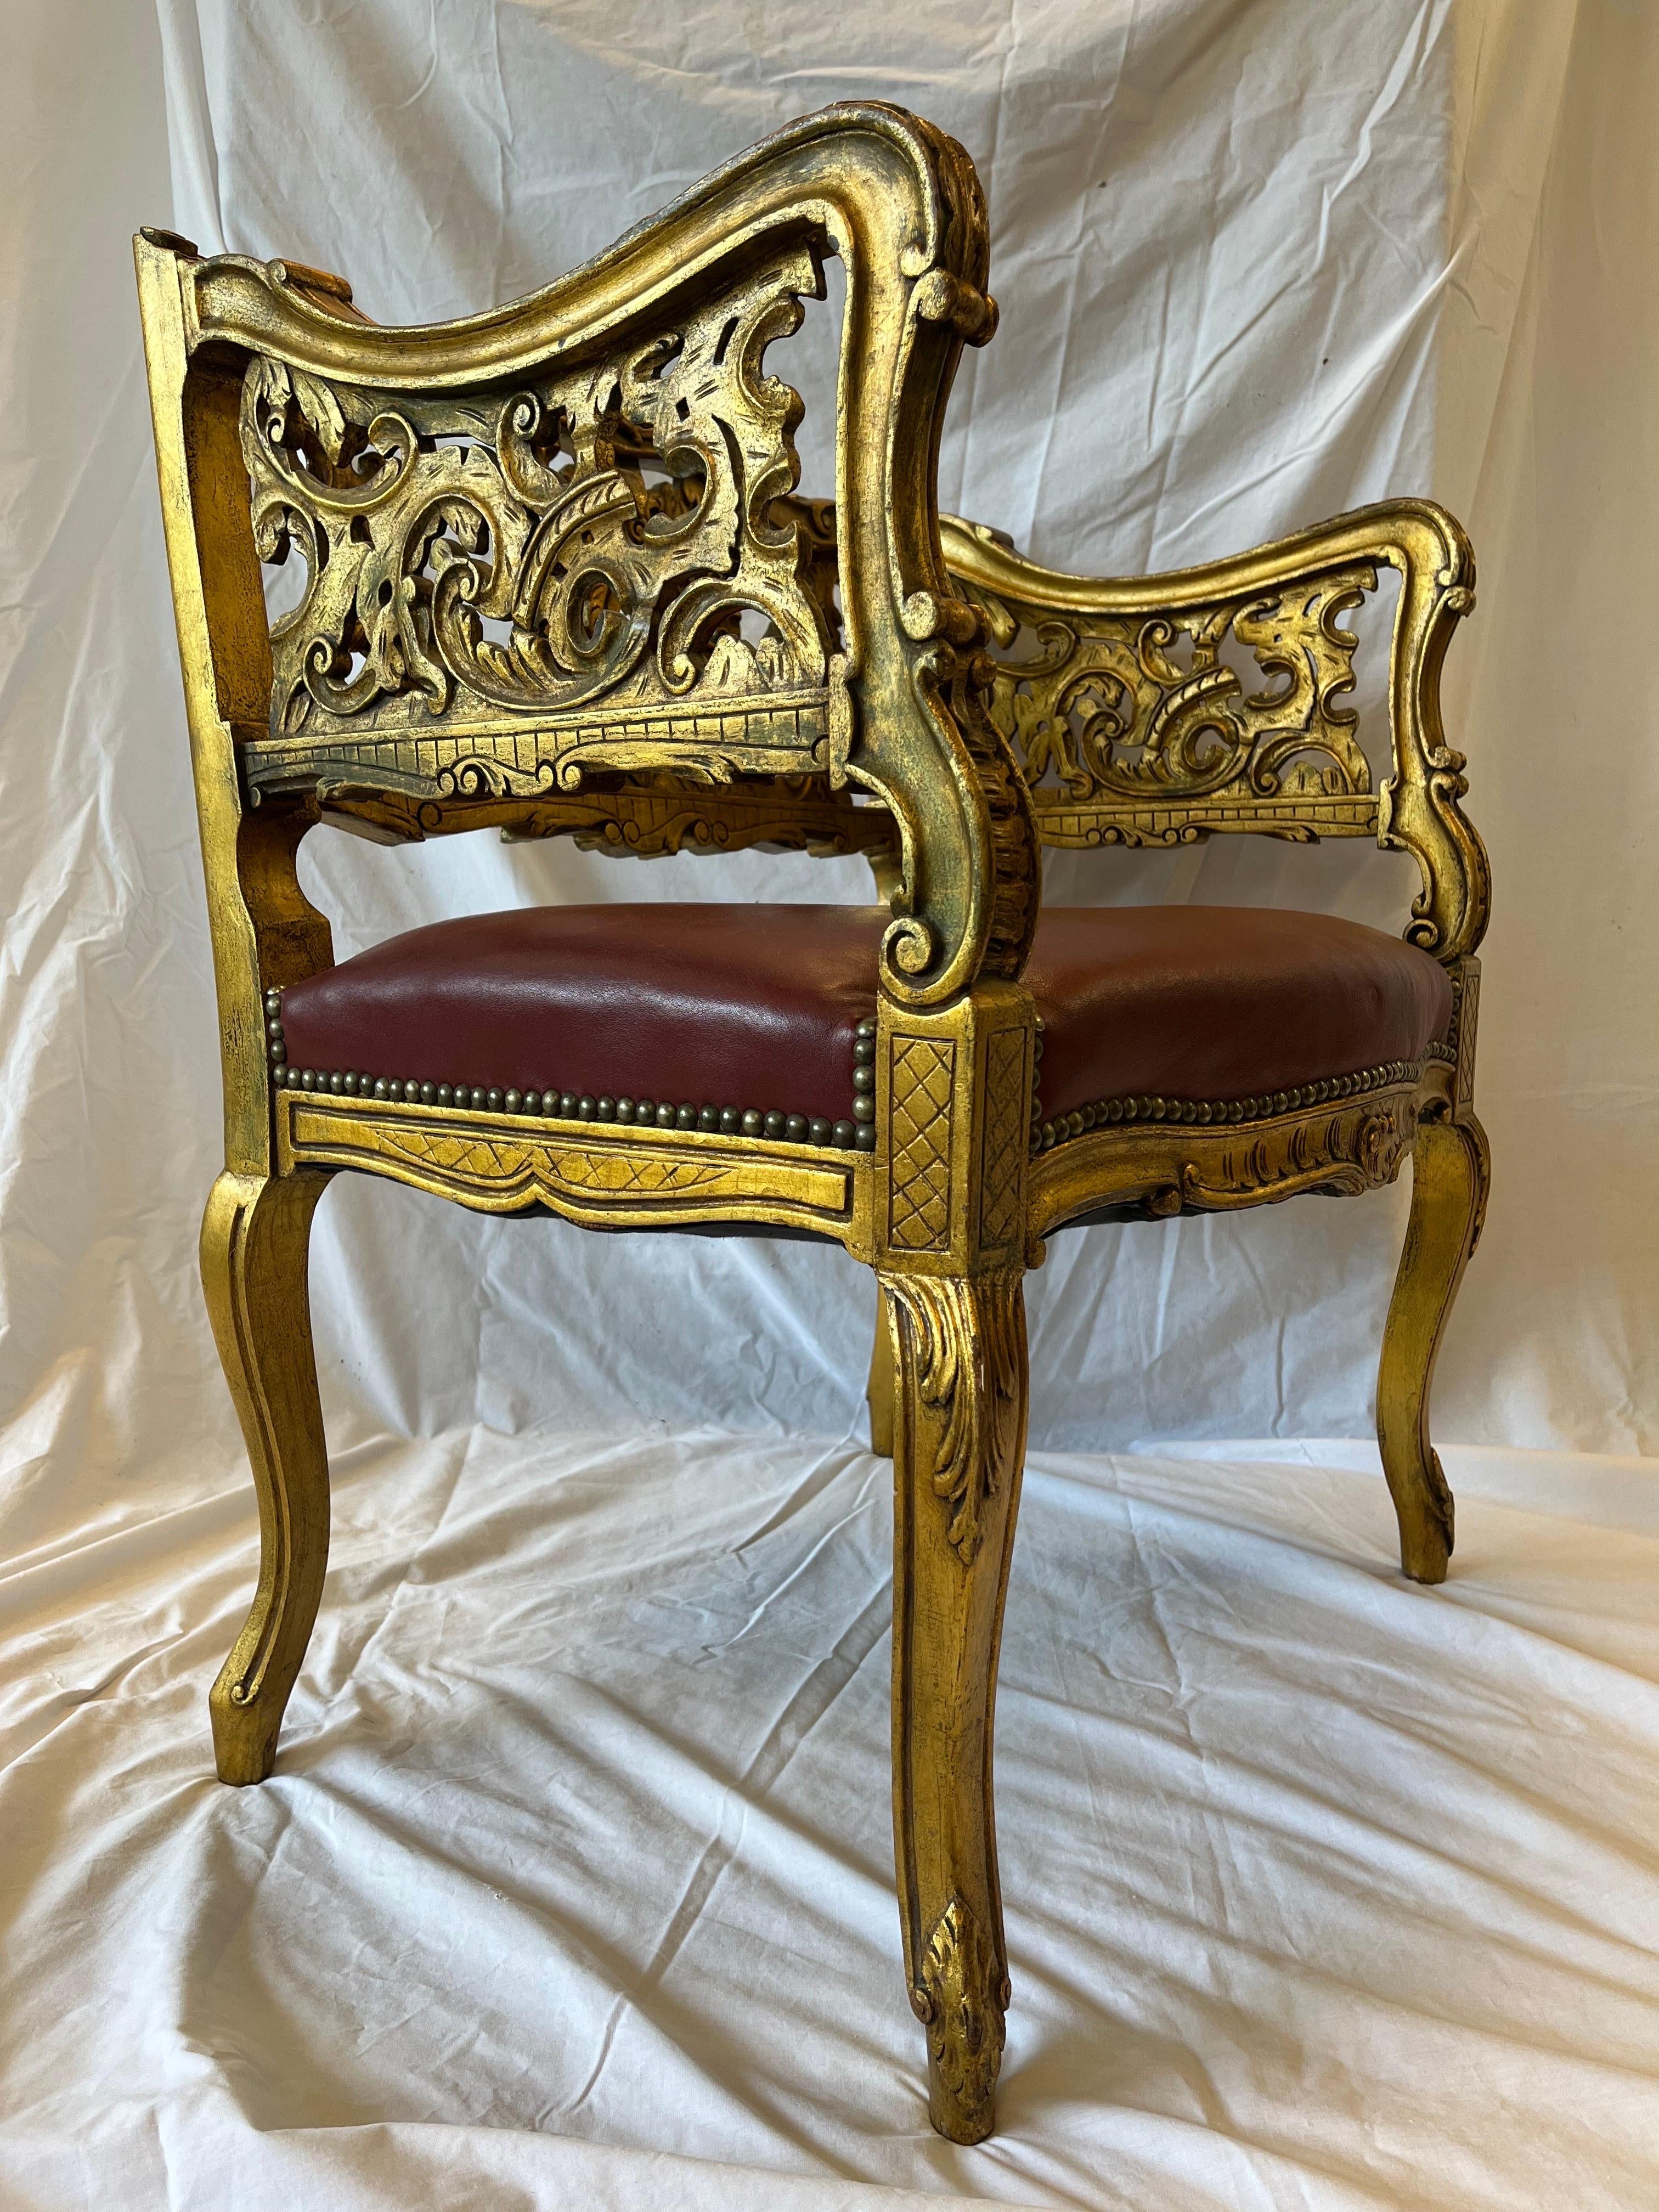 Antique Carved and Gilt Wood Arm Chair Bench Ornate Design Red Upholstered Seat In Good Condition For Sale In Atlanta, GA